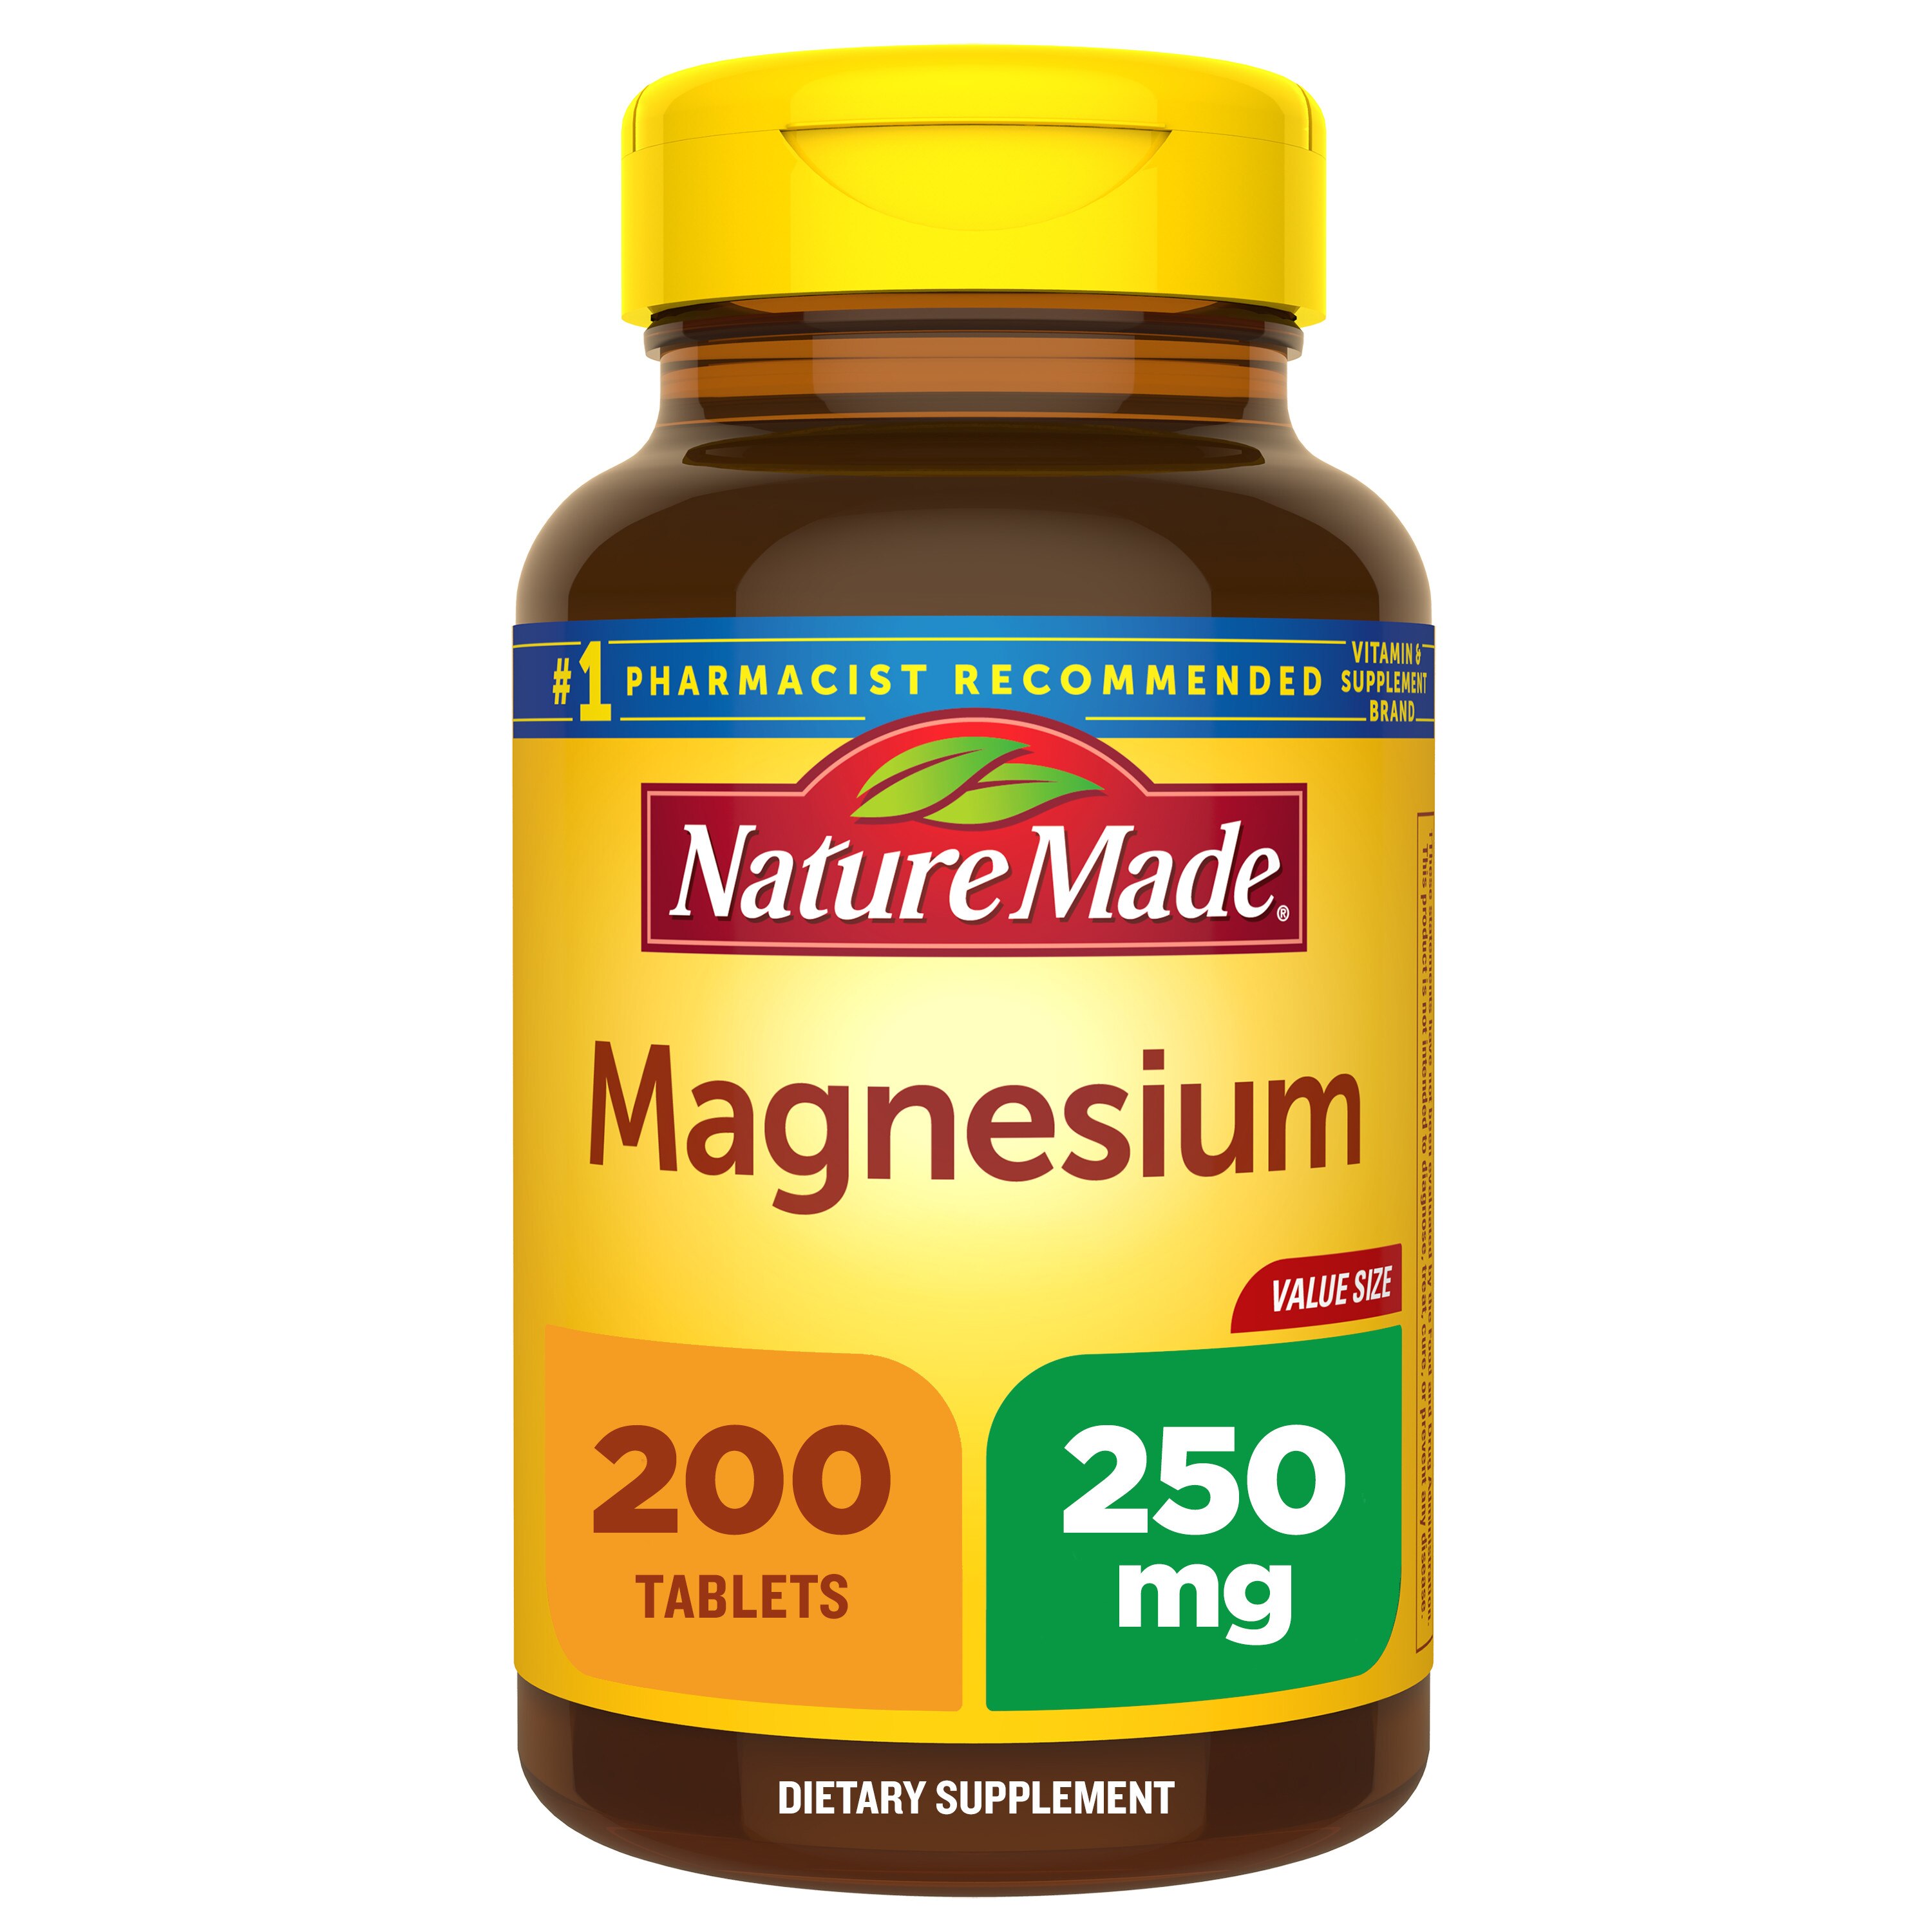 Nature Made Magnesium Oxide 250 mg Tablets, 200 CT